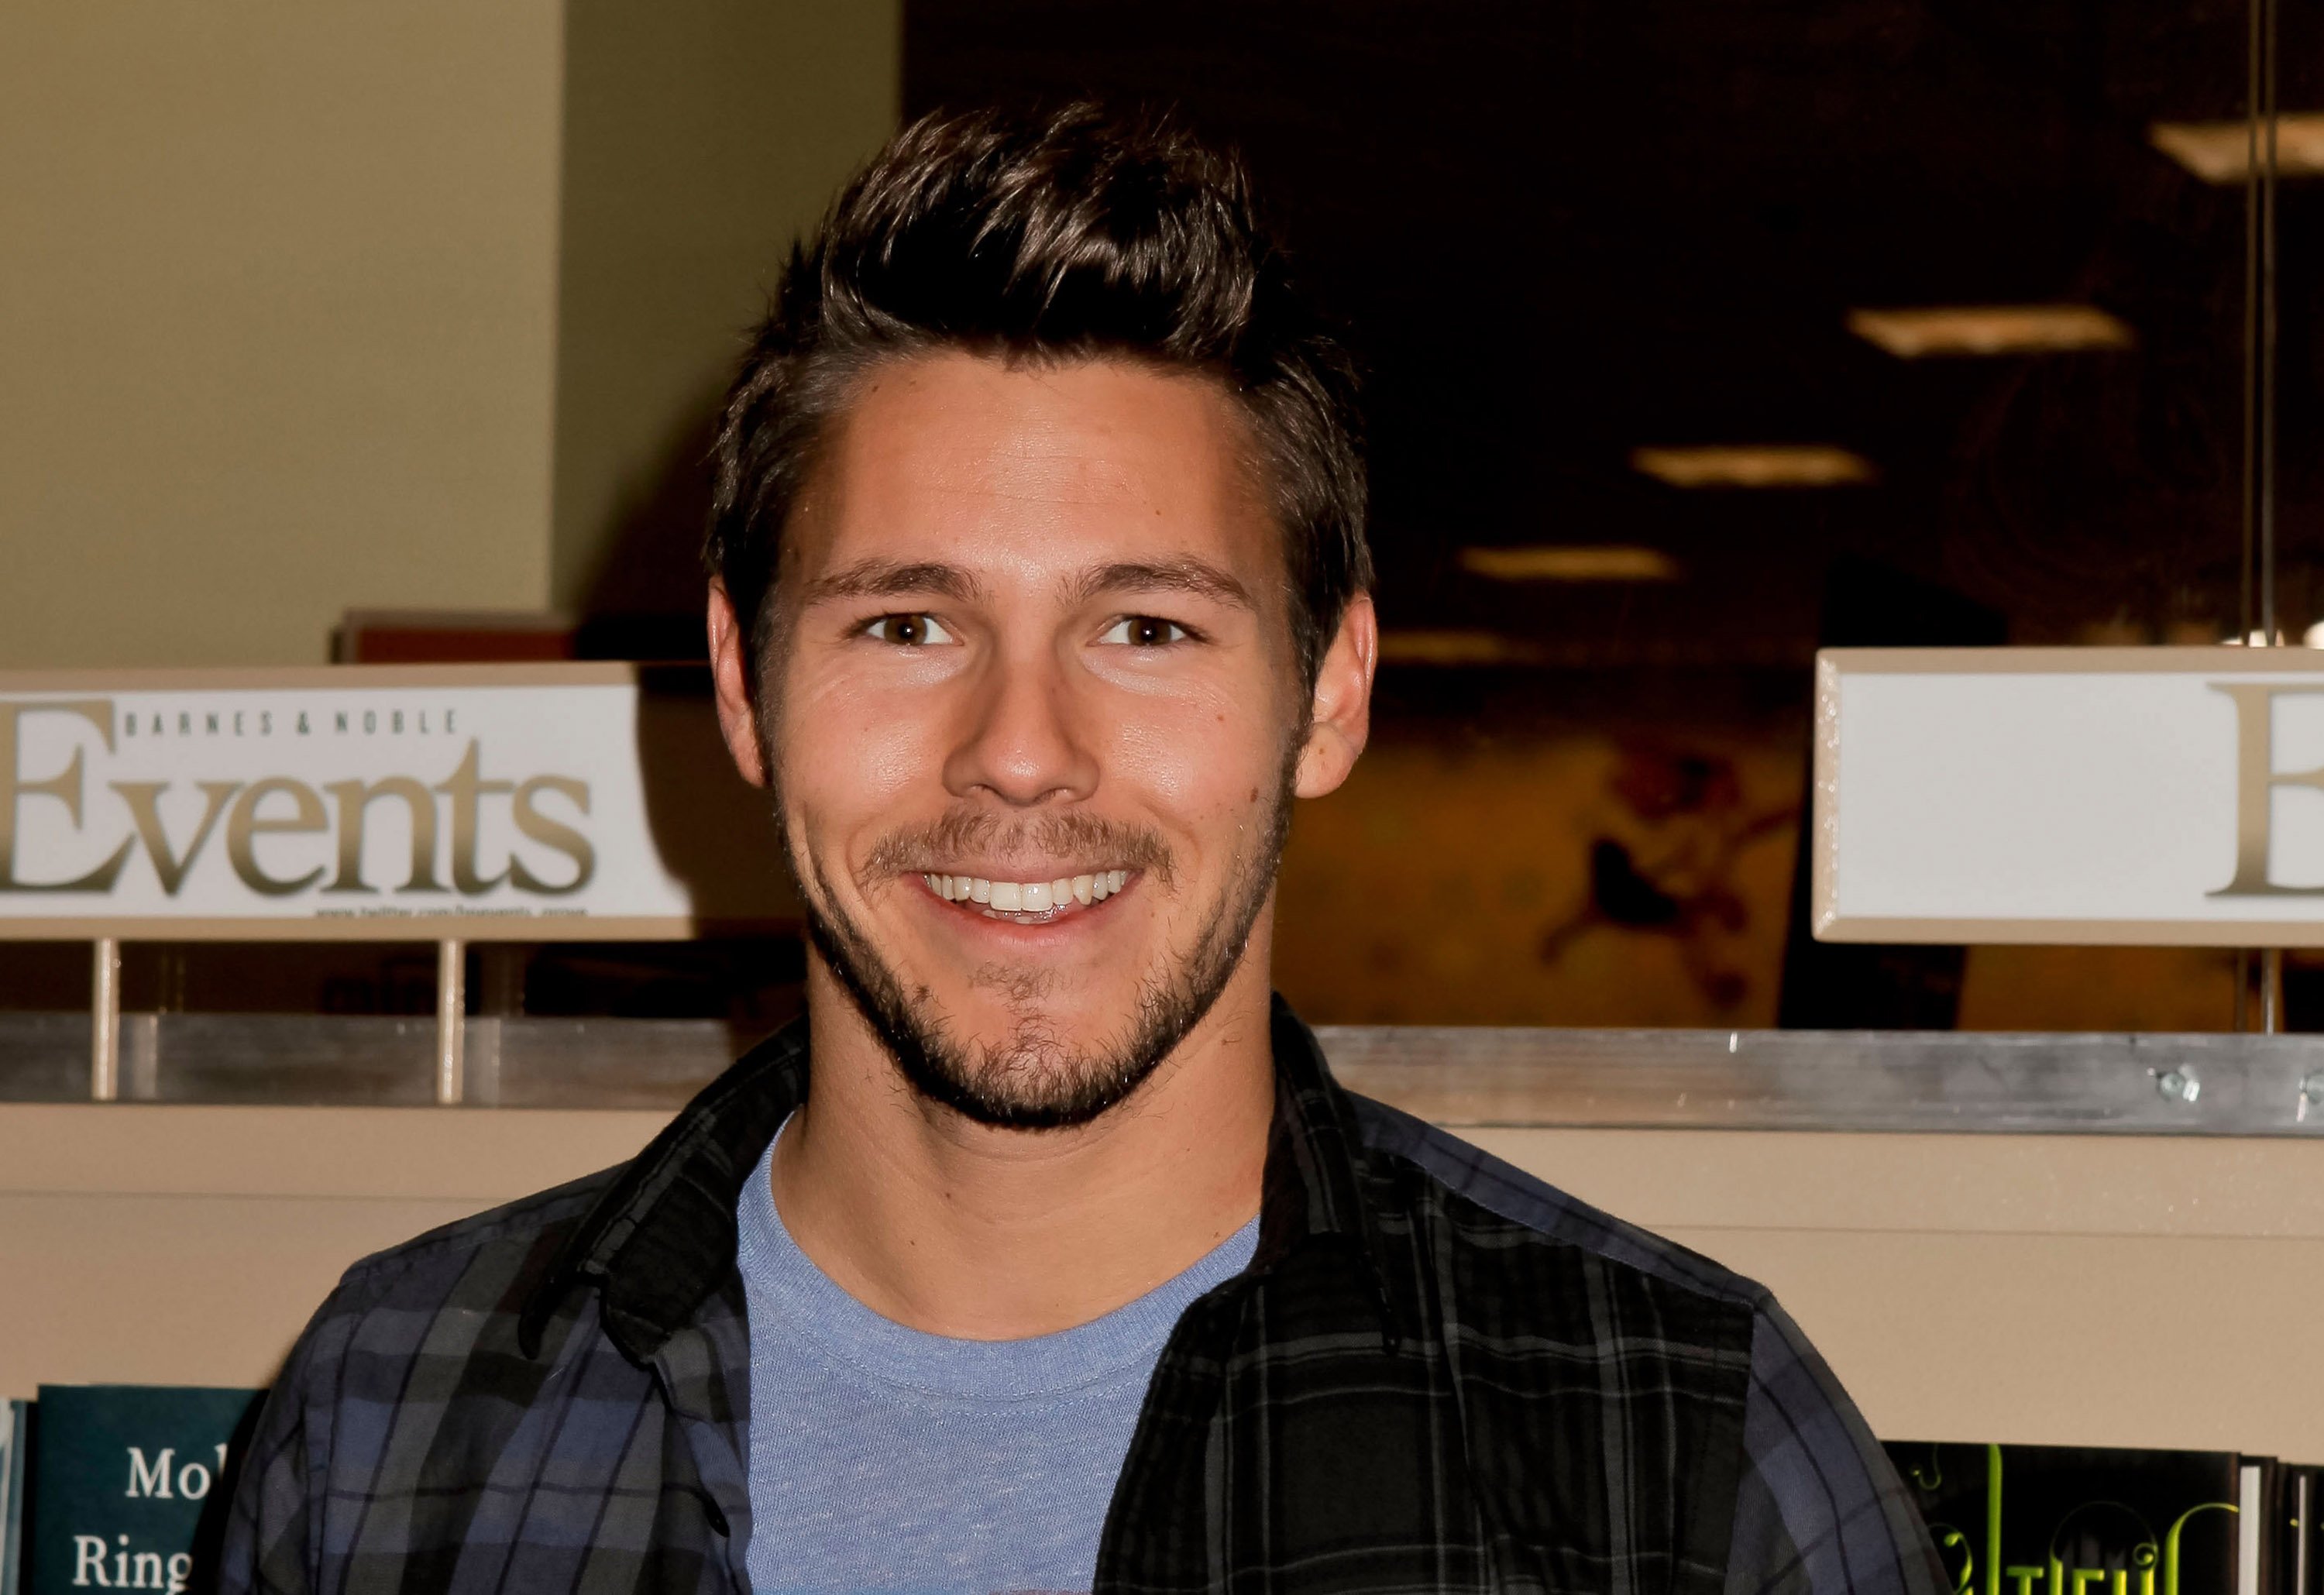 'The Bold and the Beautiful' actor Scott Clifton wearing a blue shirt and plaid jacket.